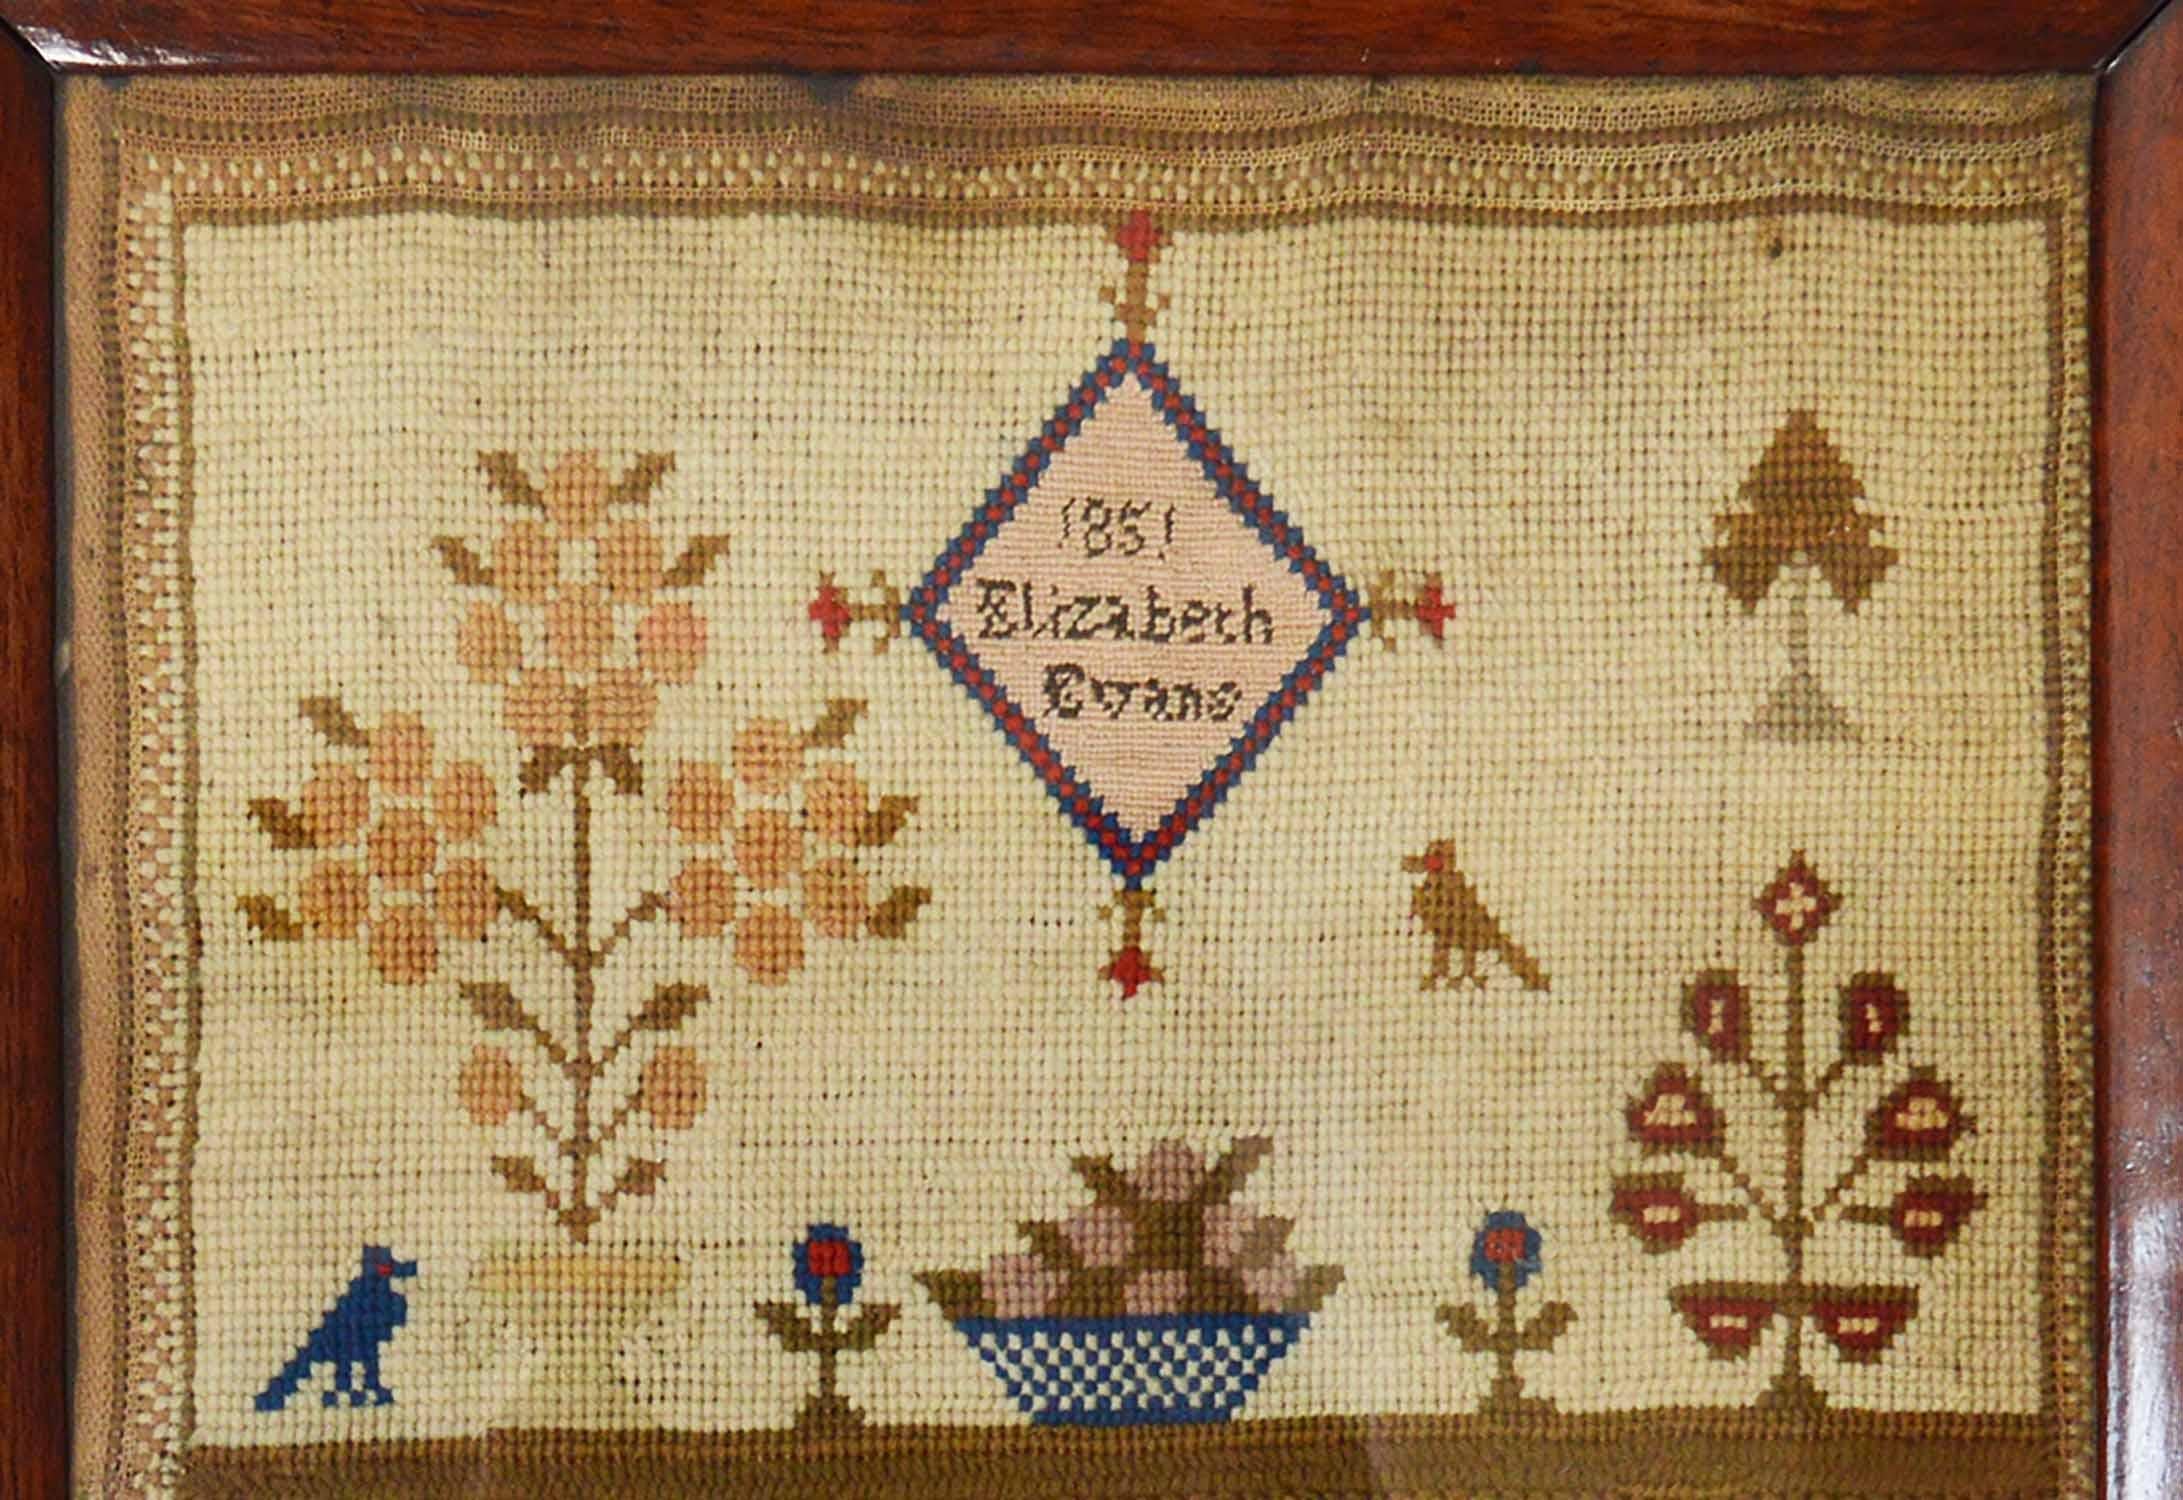 Embroidered Antique Welsh Sampler with a Country House, Elizabeth Evans, 1851